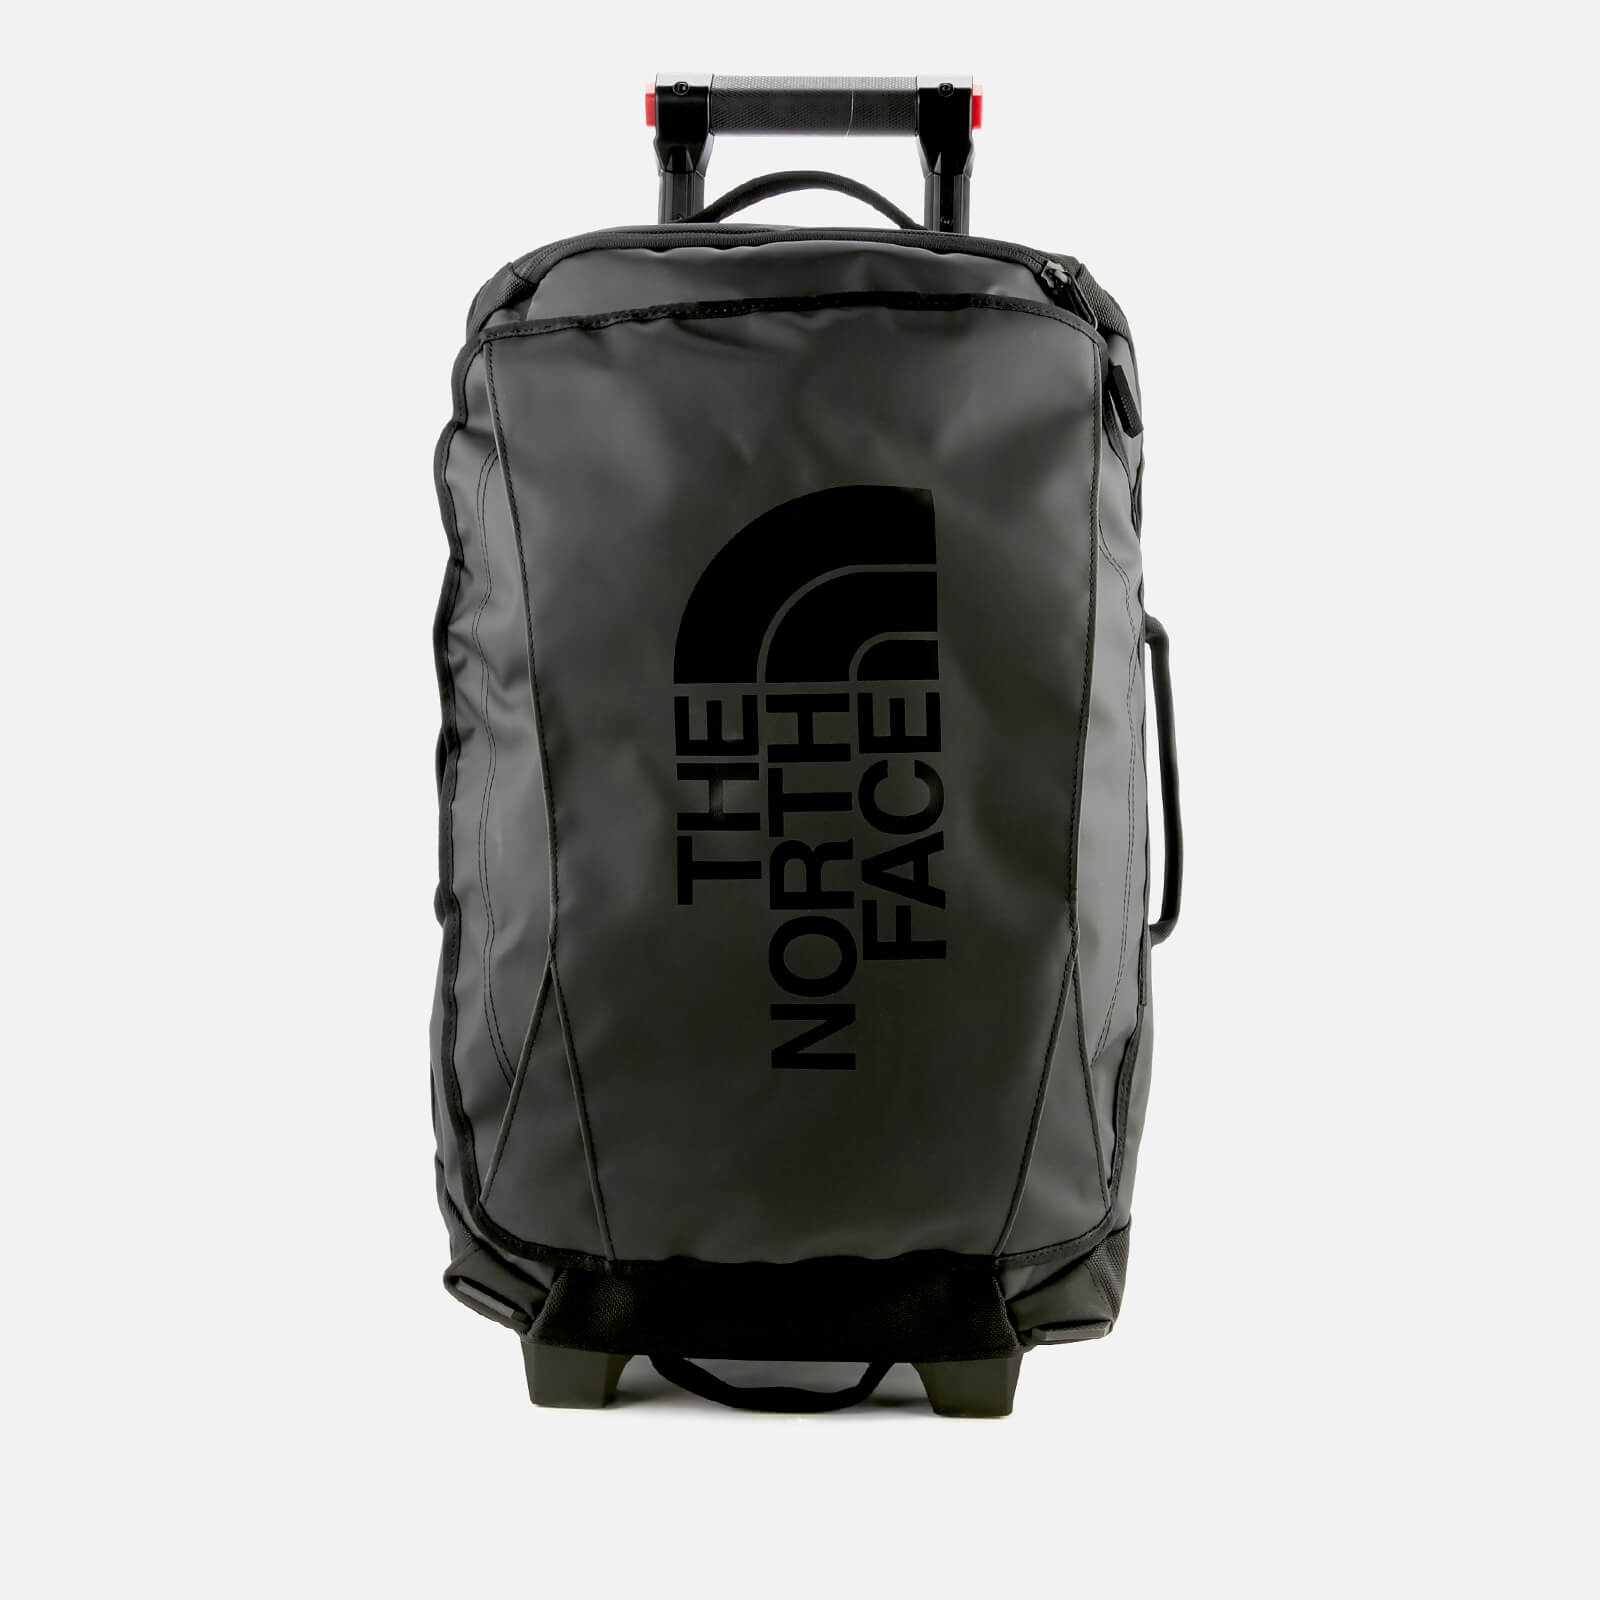 north face carry on luggage uk 